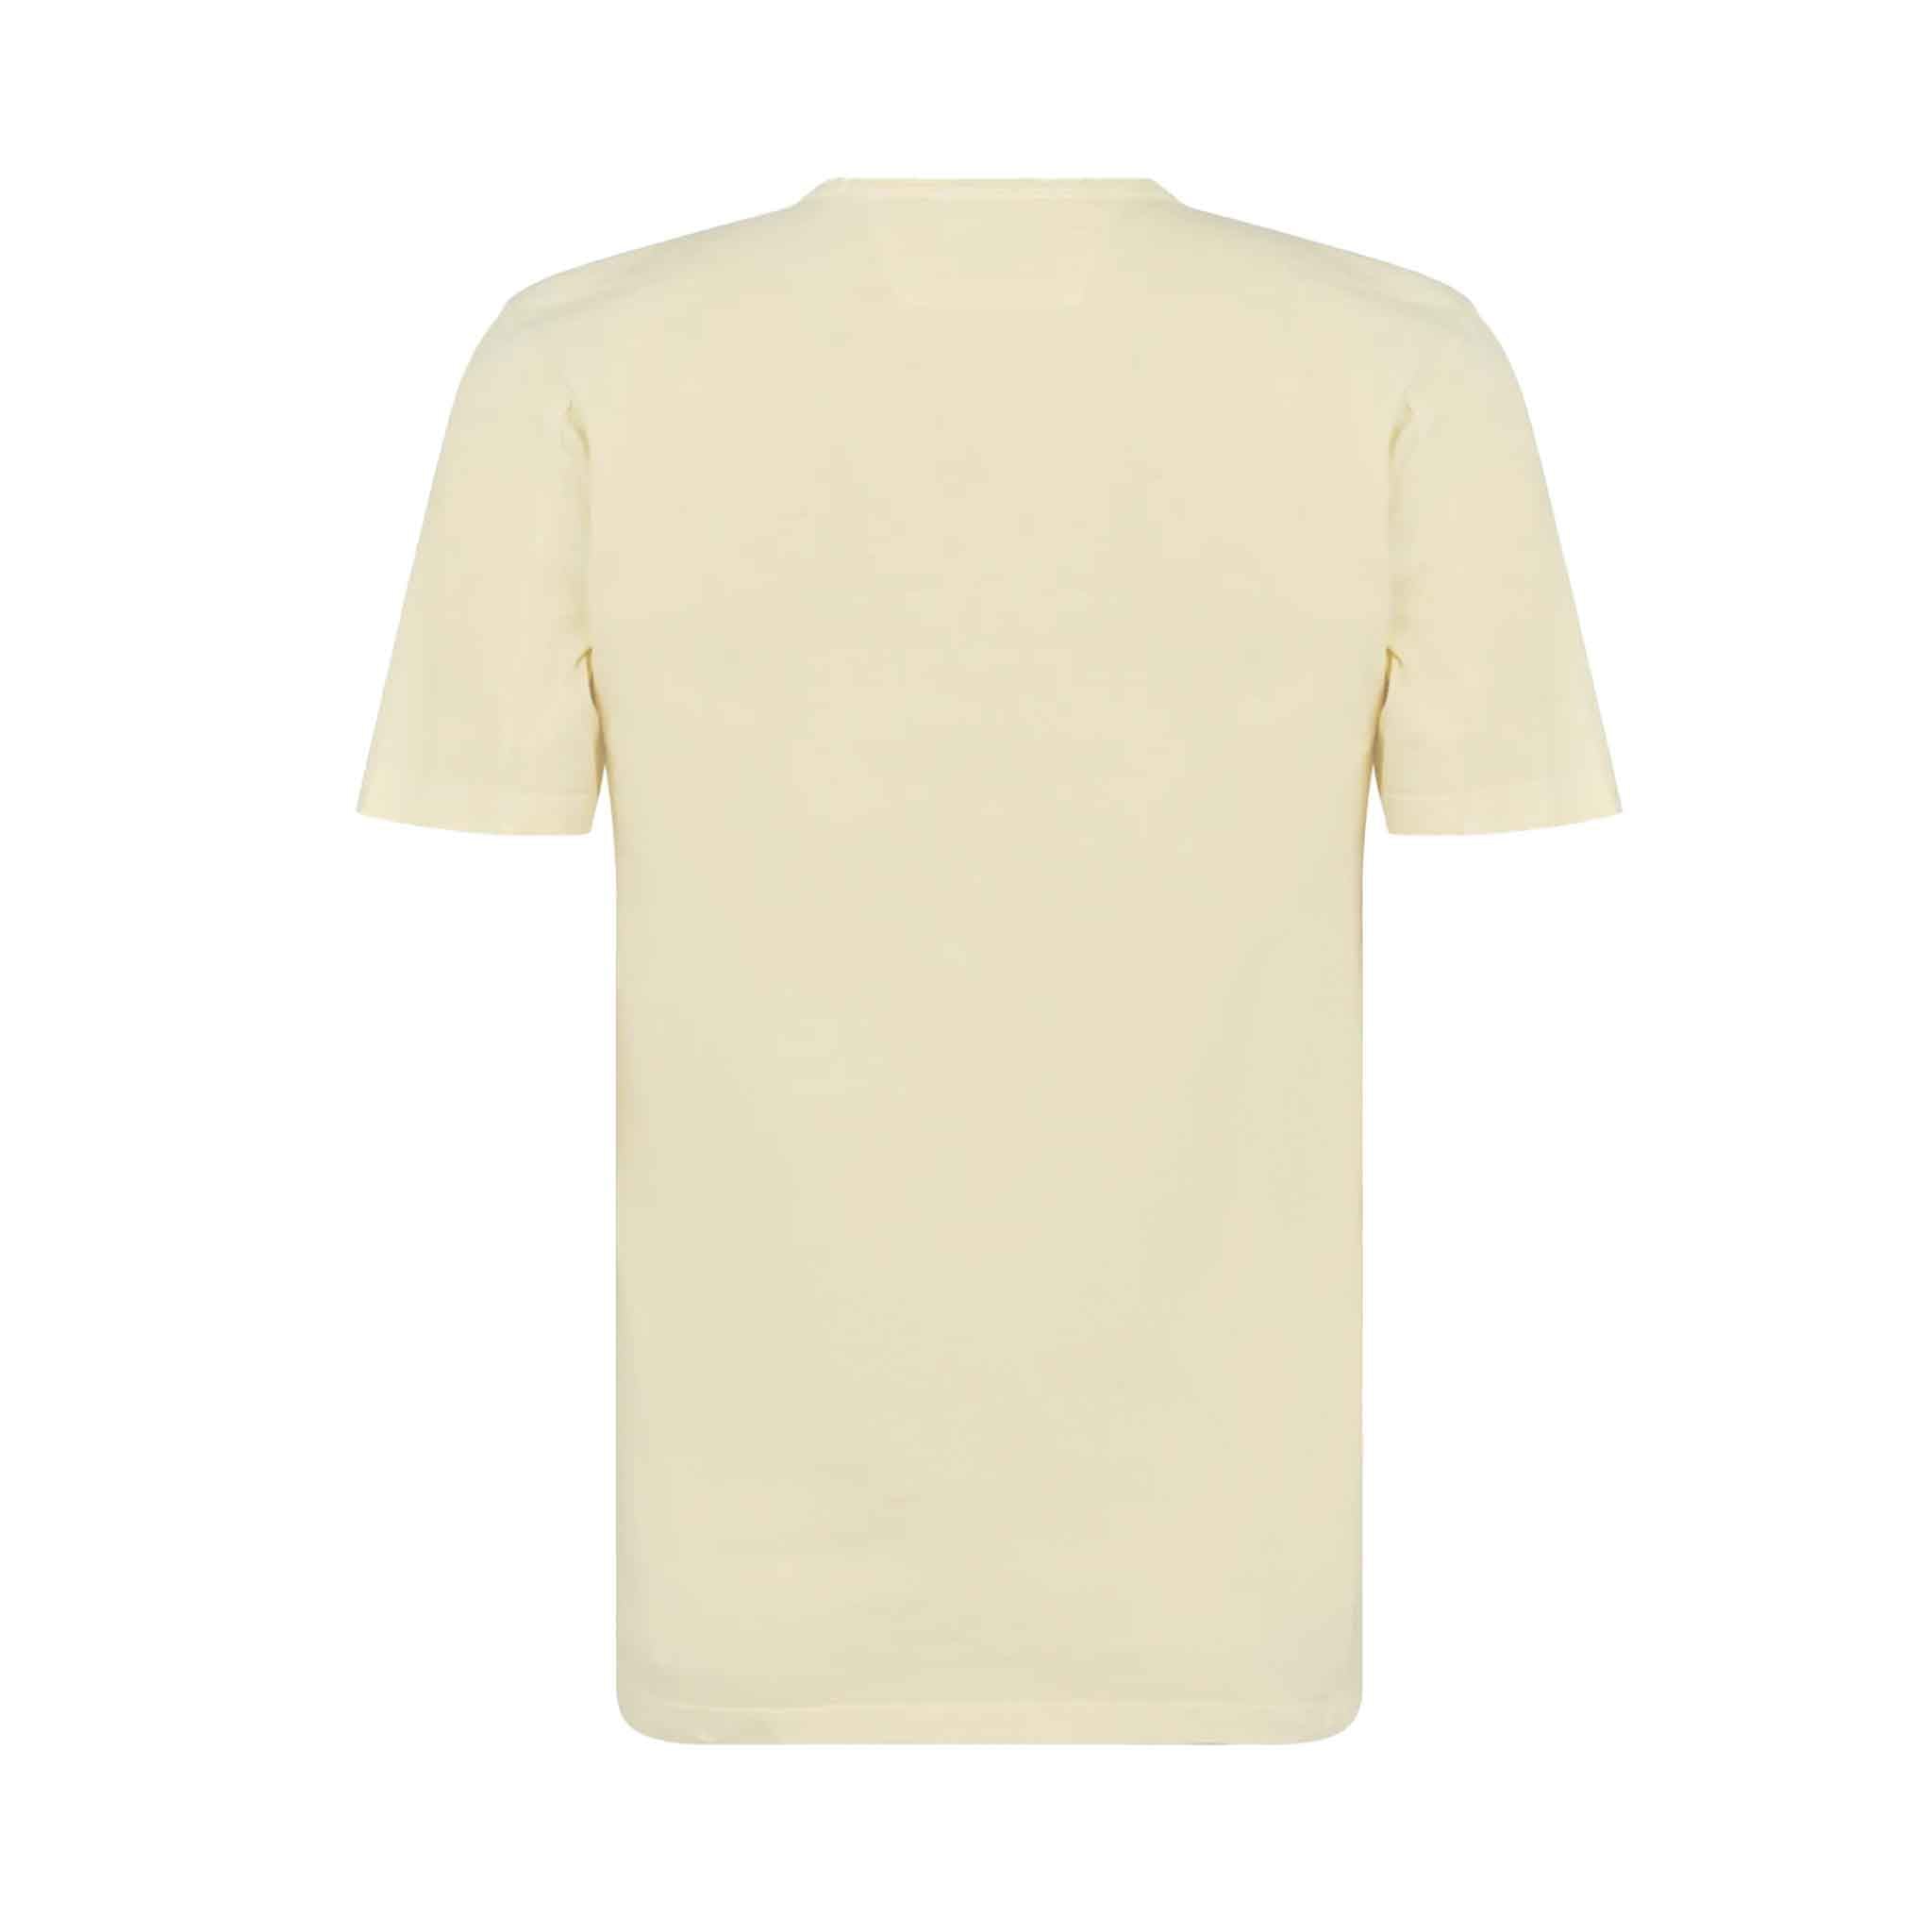 C.P. Company 30/1 Jersey Label T-shirt in Pistachio Shell